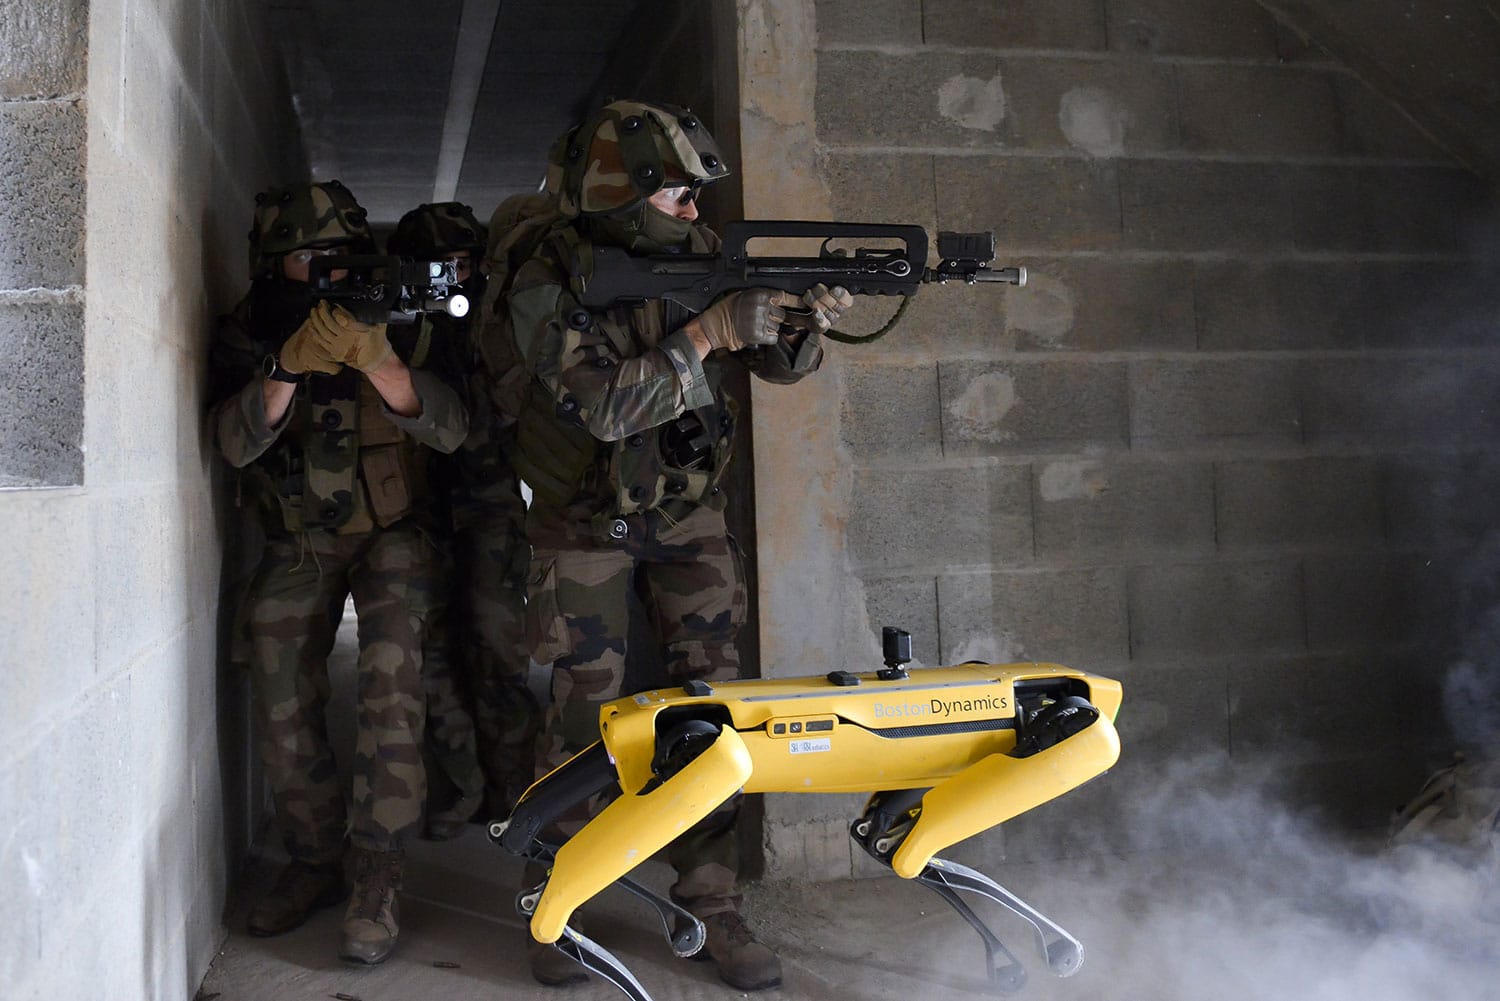 The French army tests Boston Dynamics' Spot robots in combat scenarios.